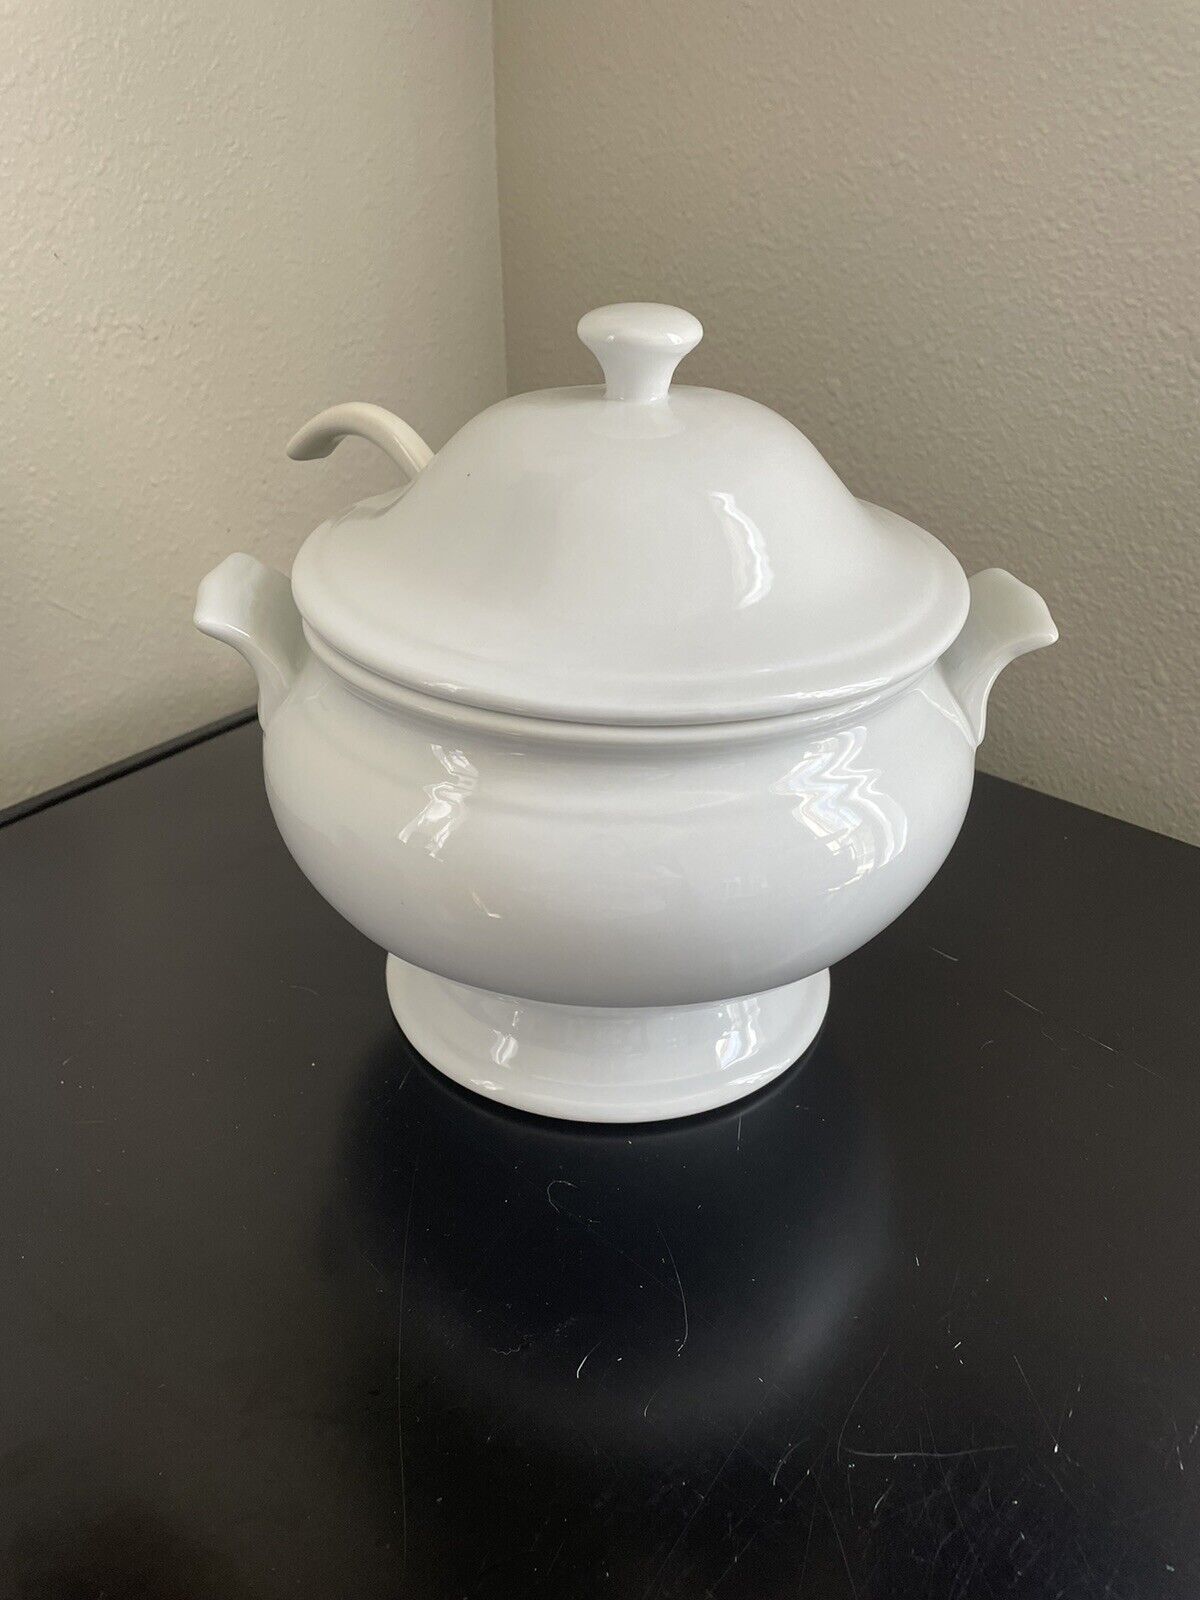 BIA Cordon Blue Soup Tureen With Ladle From Pottery Barn